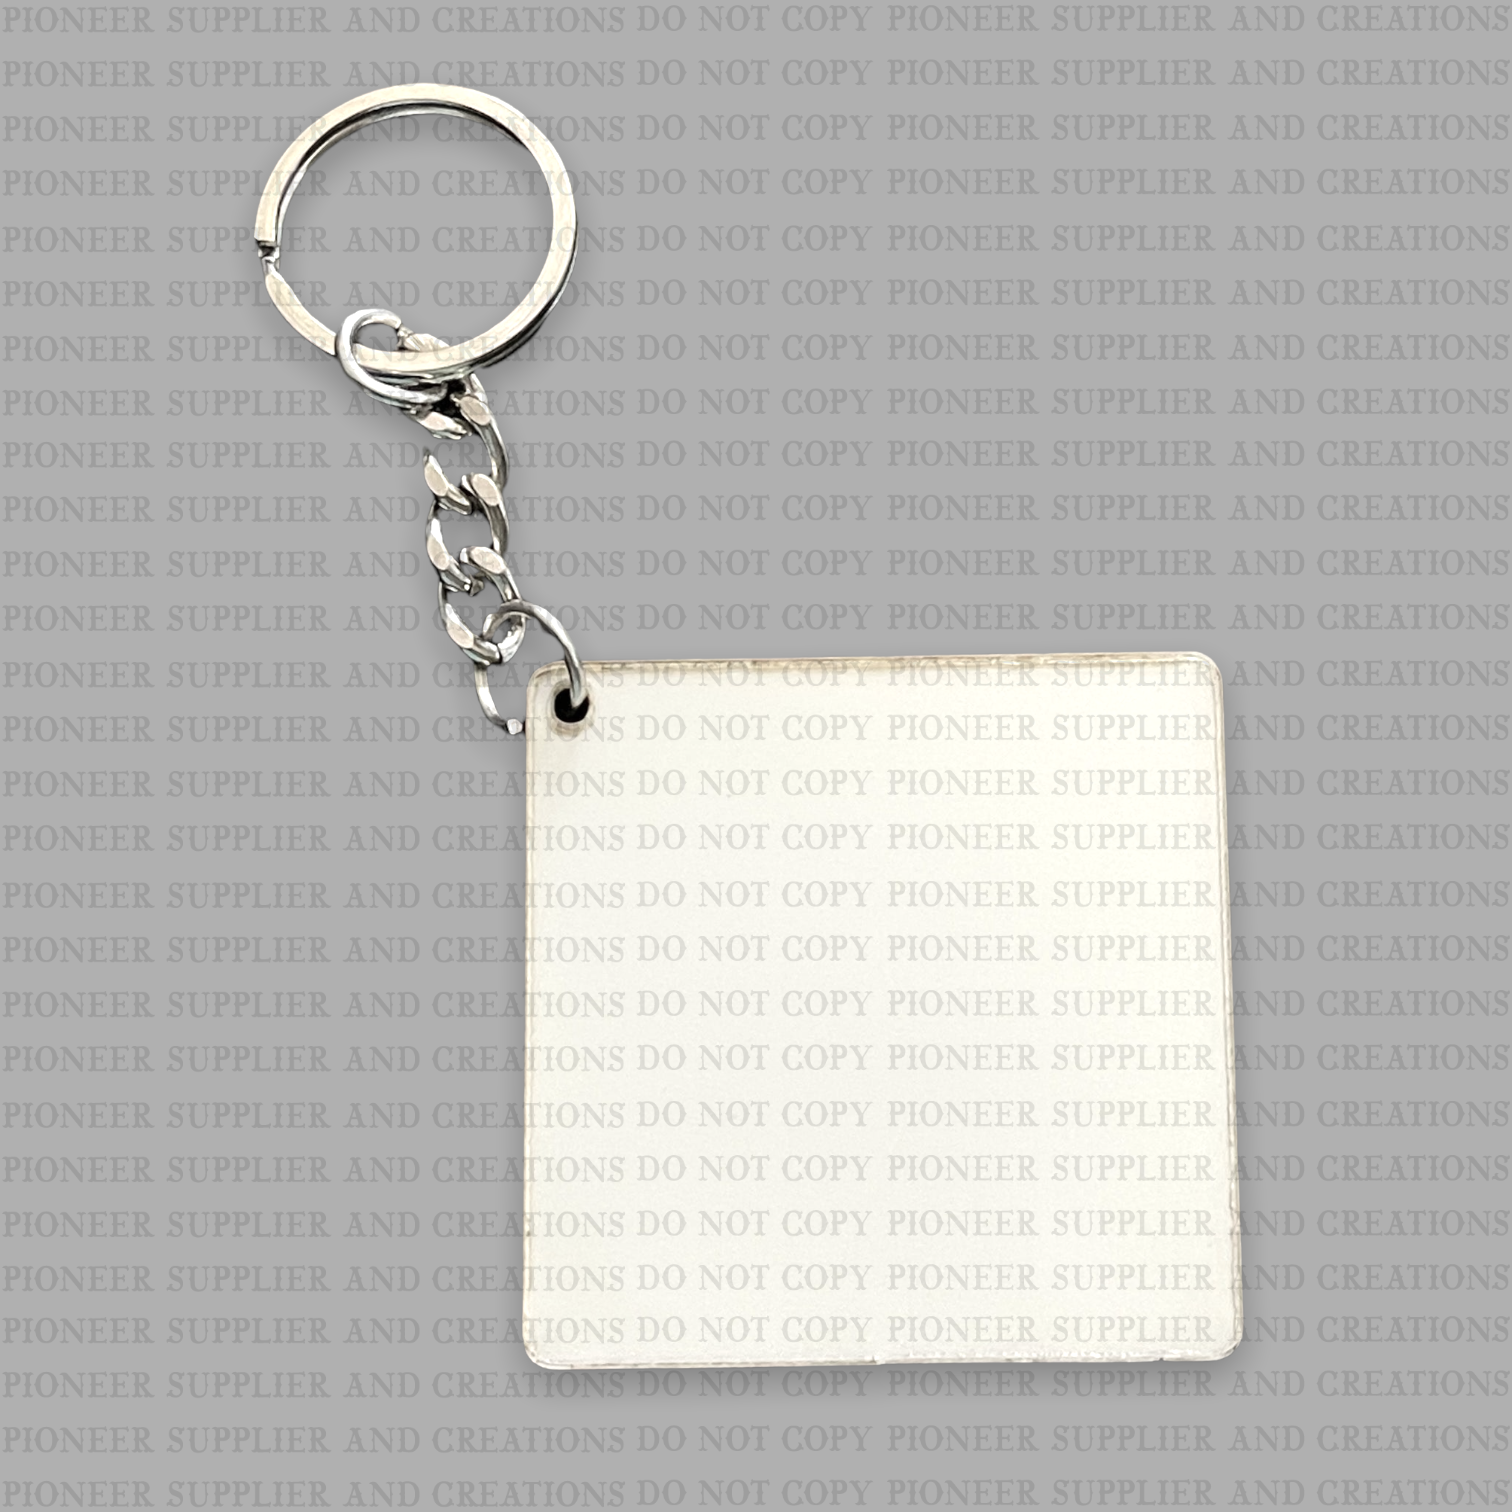 Square Sublimation Keychain 2 in - Pioneer Supplier & Creations